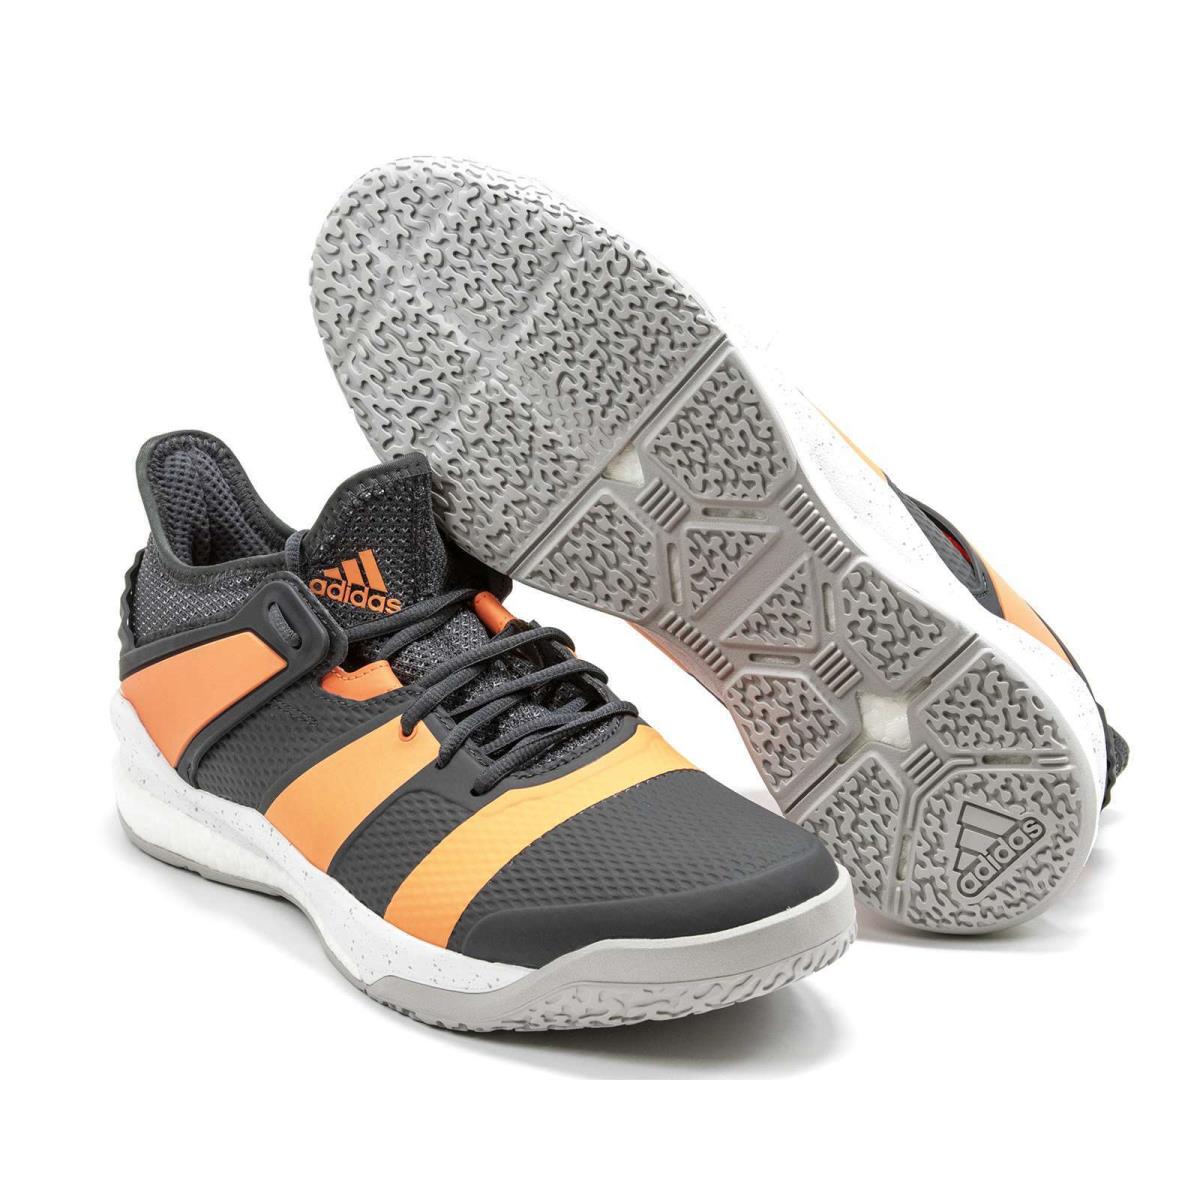 Mens Adidas Stabil x Cross Trainer Grey Athletic Shoes Indoor Court Sneakers - Gray